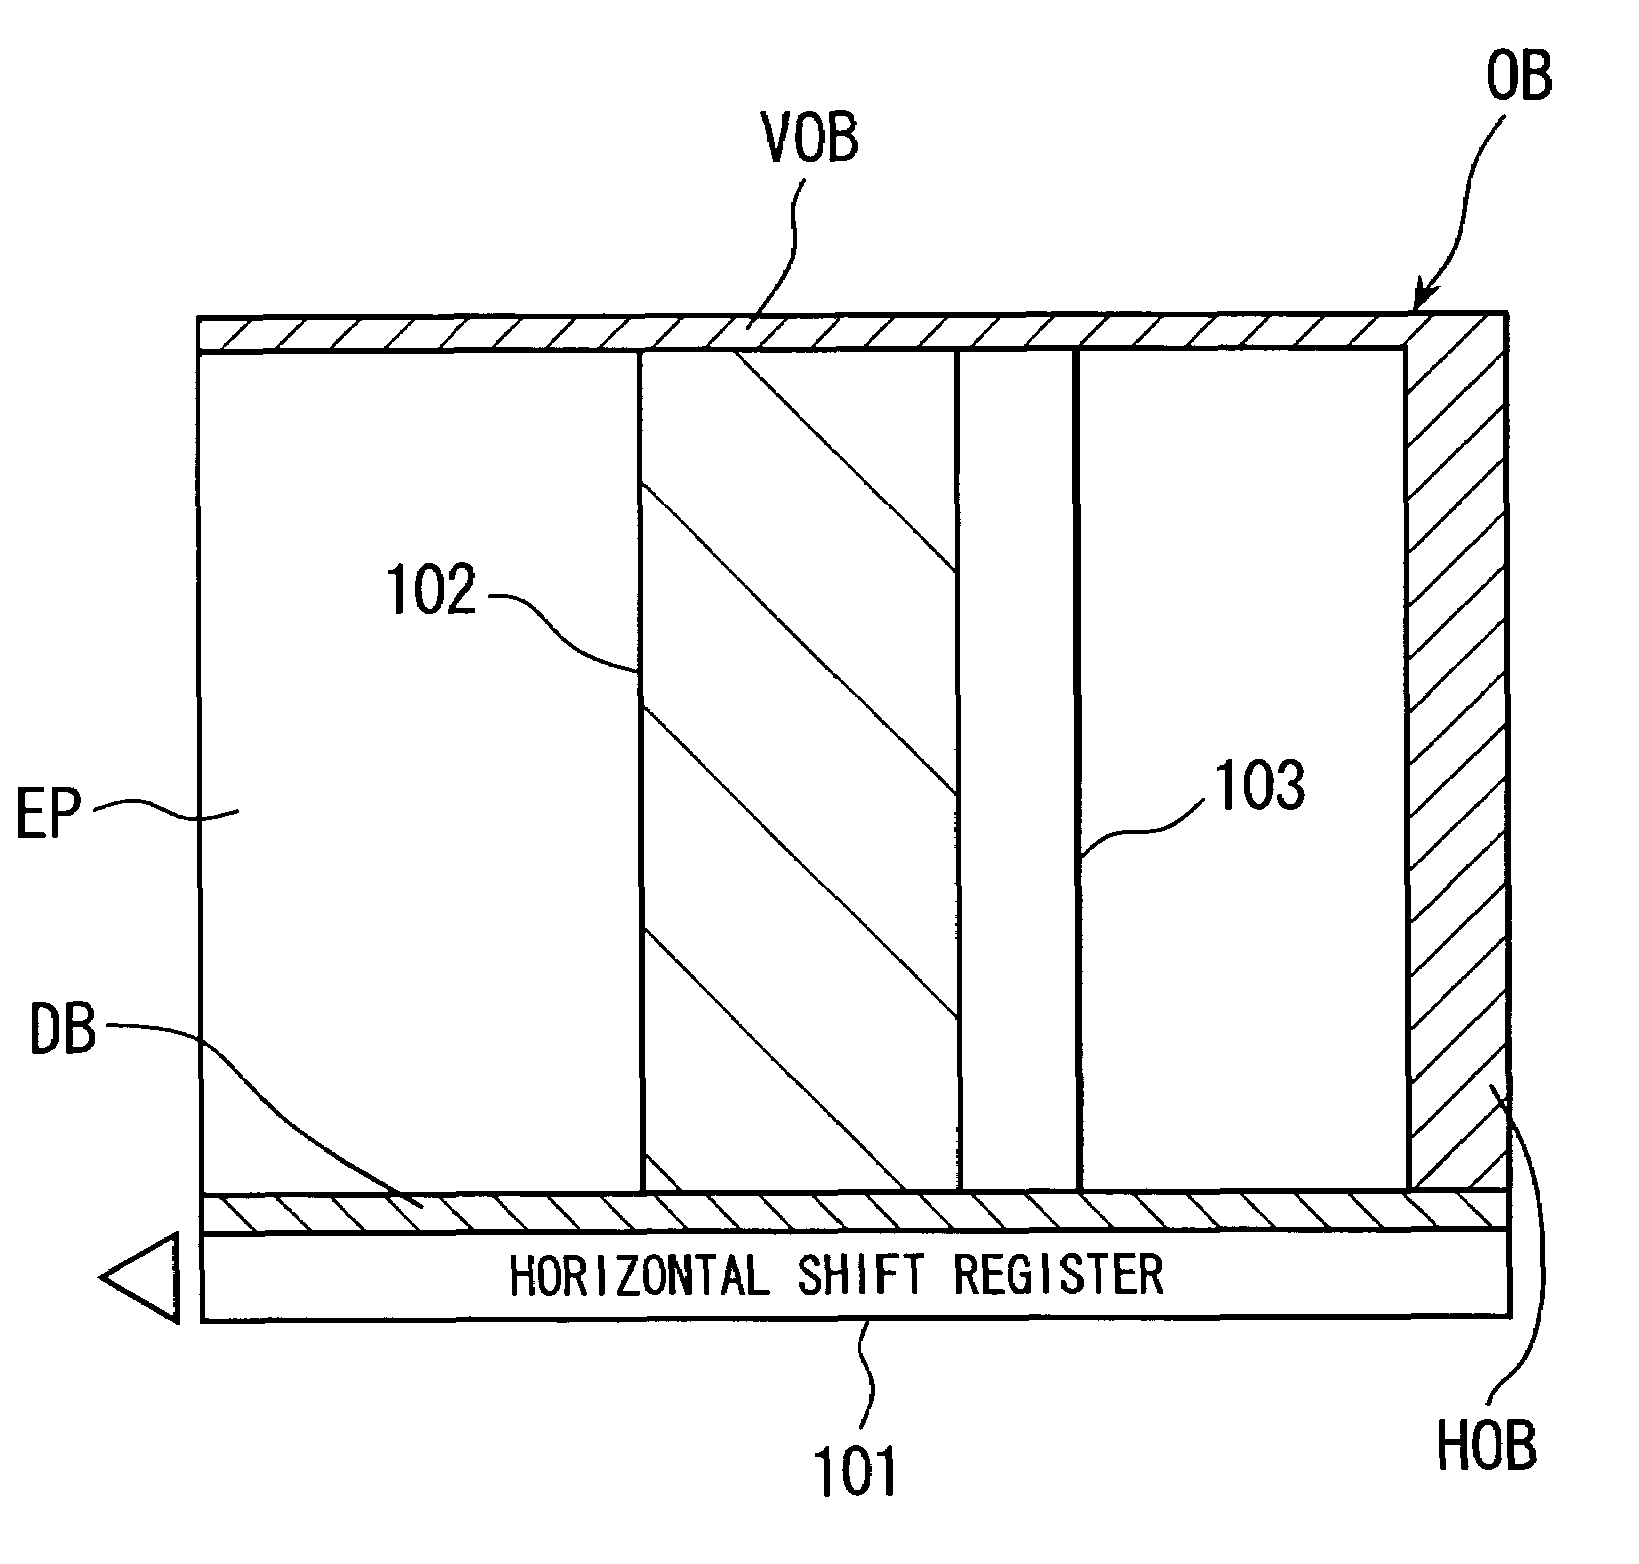 Electronic imaging apparatus operable in two modes with a different optical black correction procedure being effected in each mode